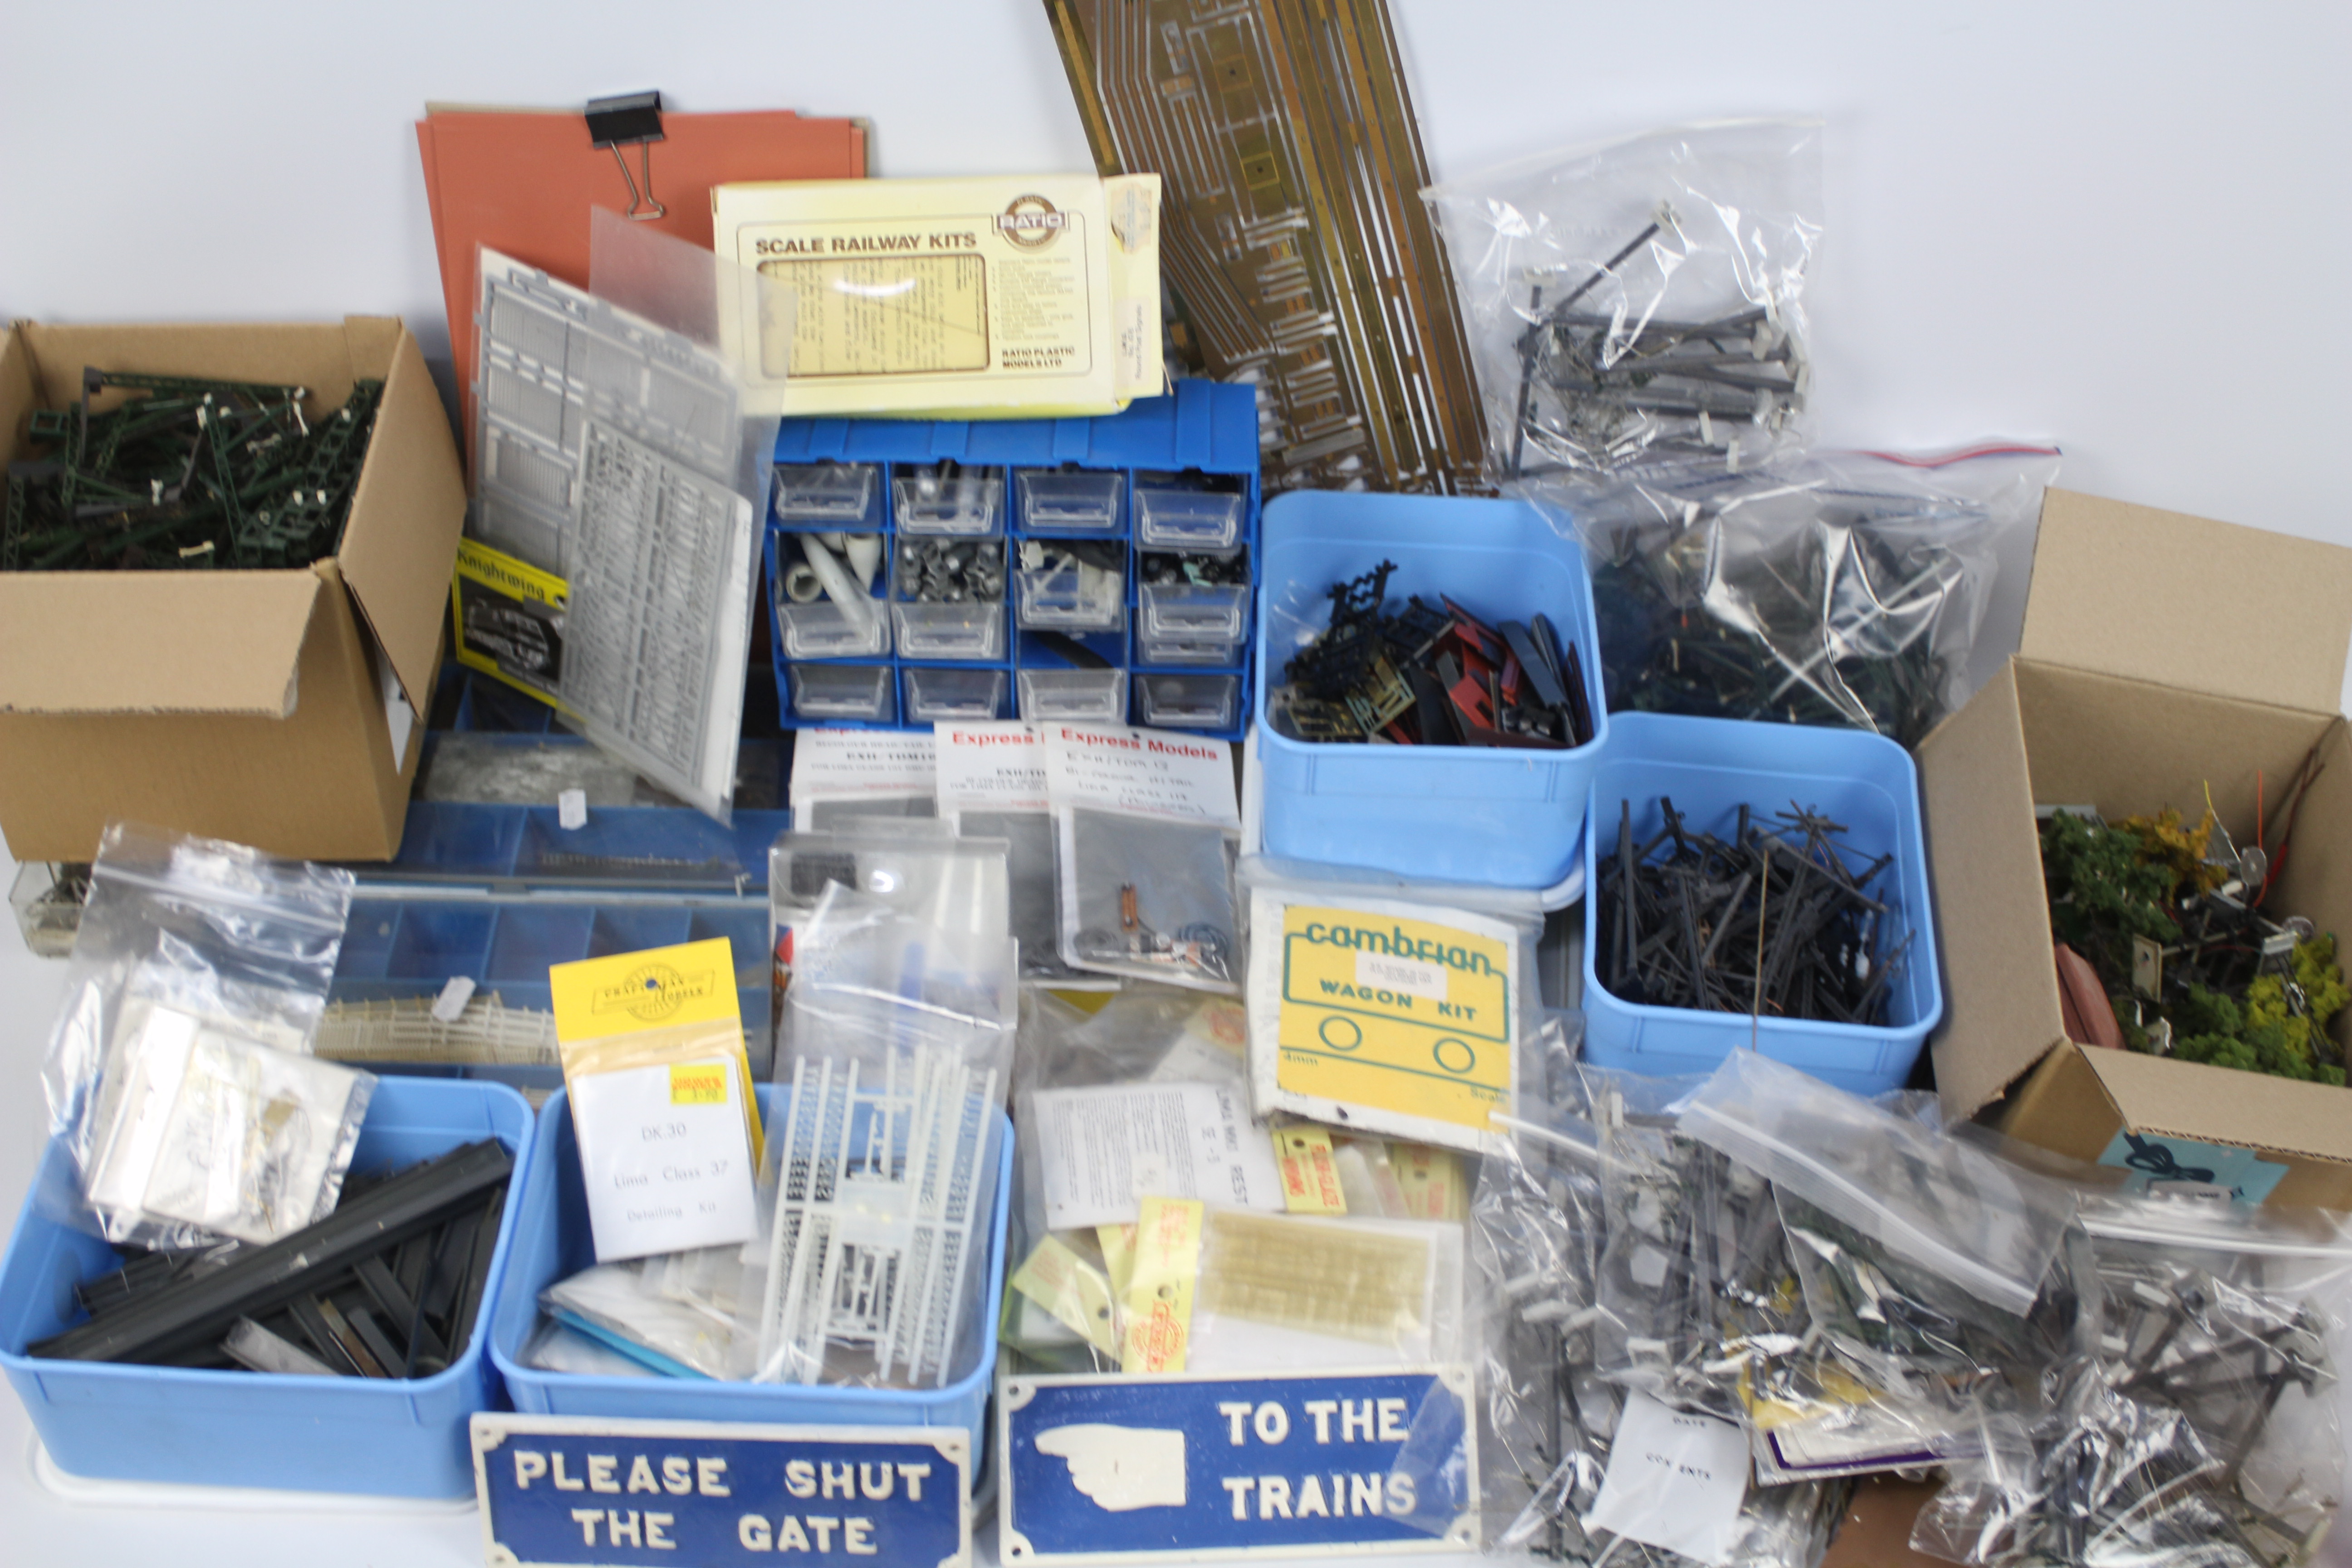 Tri-ang - Peco - A quantity of railway modelling items and equipment including a box of fencing,